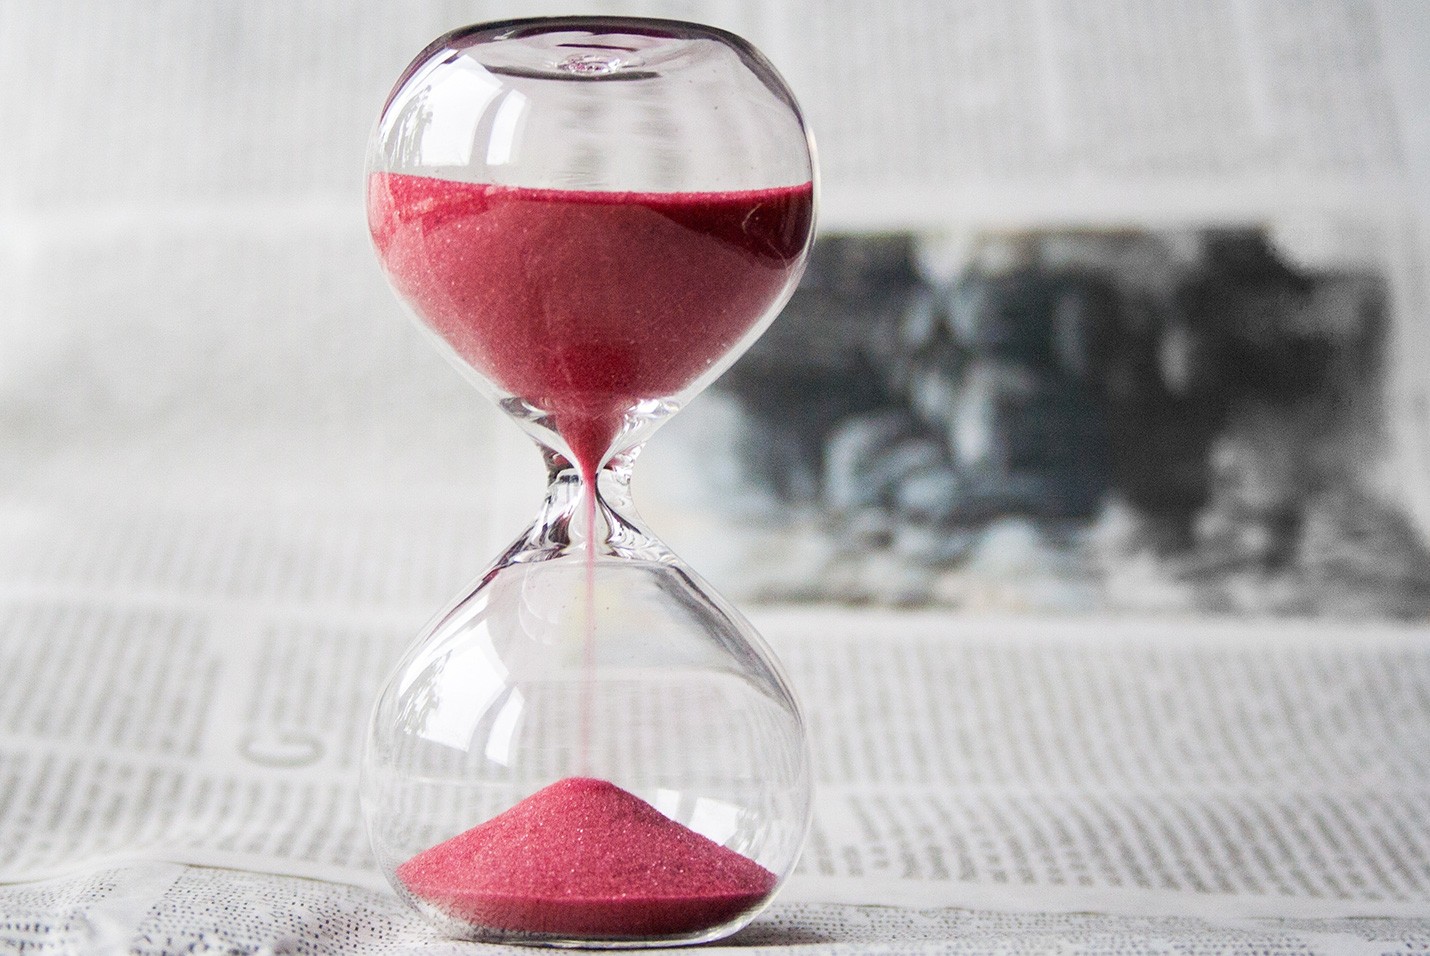 Time is Money: Finding More Time To Manage Your Home Care Business